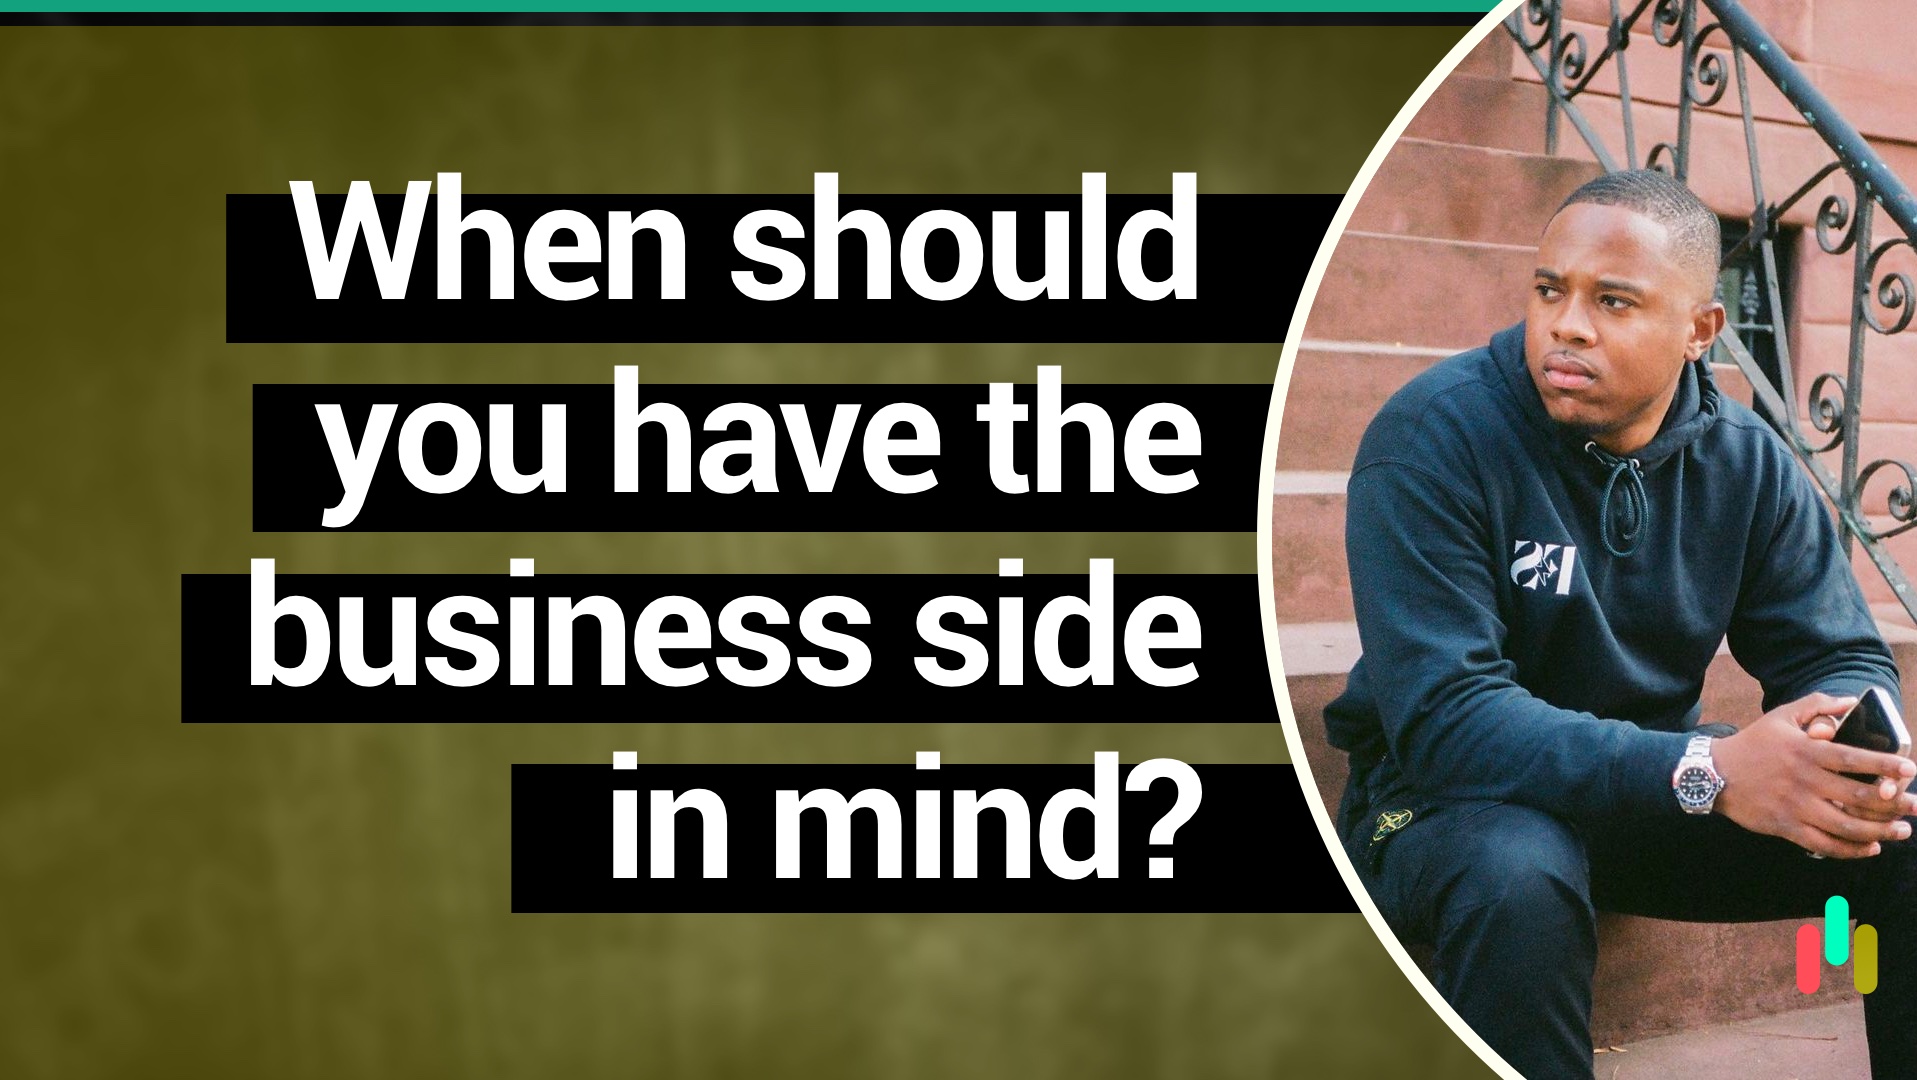 Entertainment lawyer @esqfowlkes on when to have the business part of the industry in mind